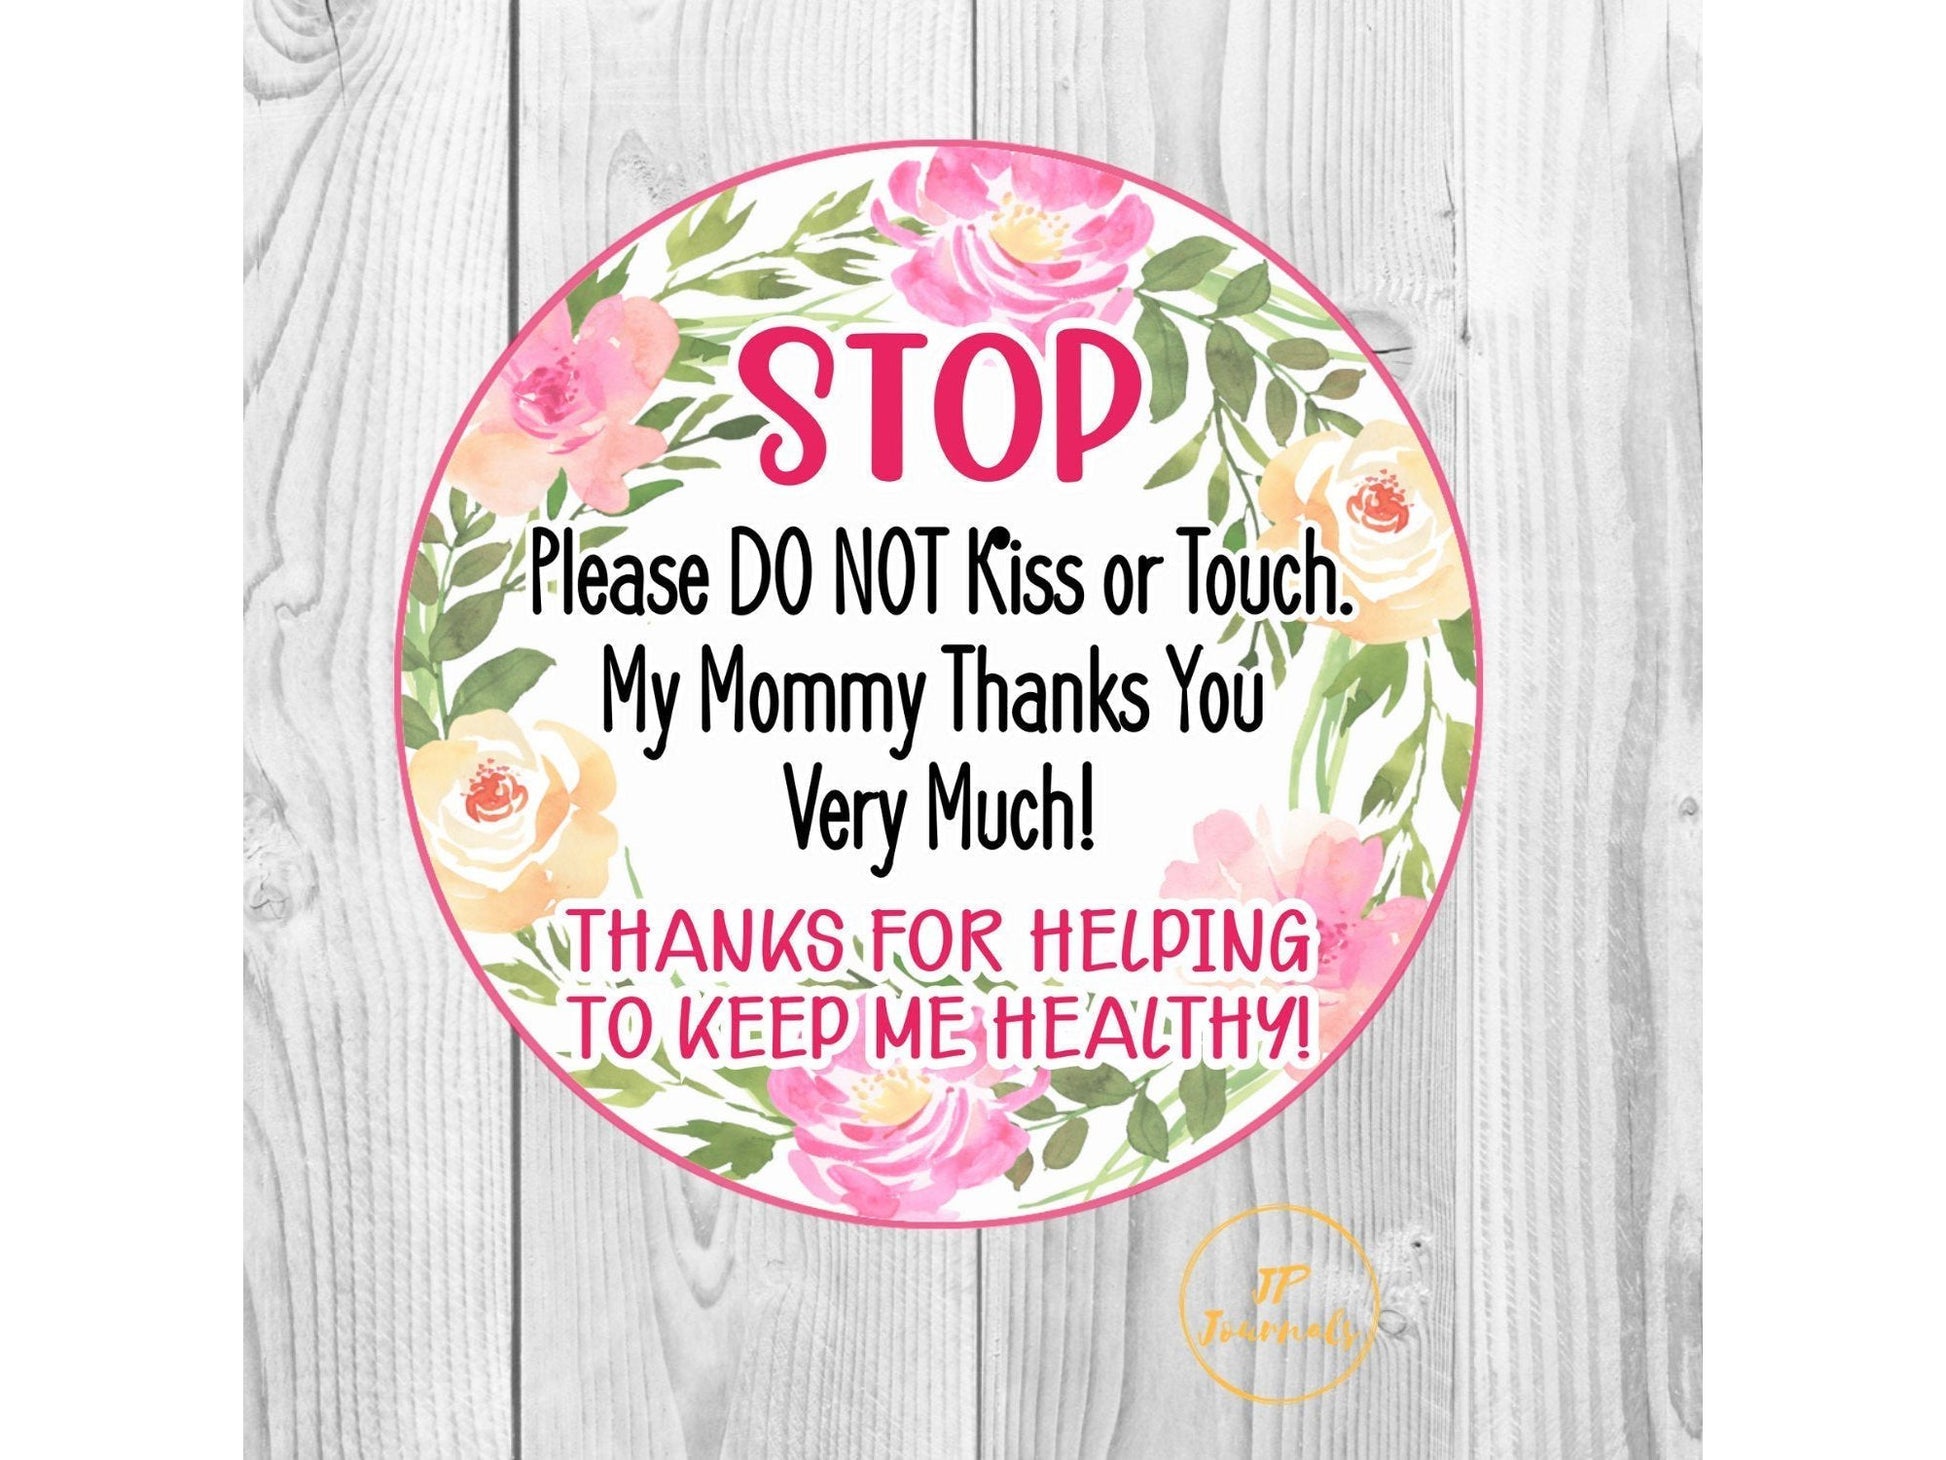 Printed and Laminated Please Do Not Touch Baby Sign for Infant Girls - Pretty Watercolor Flower Design - Infant Carseat Sign - Do Not Kiss